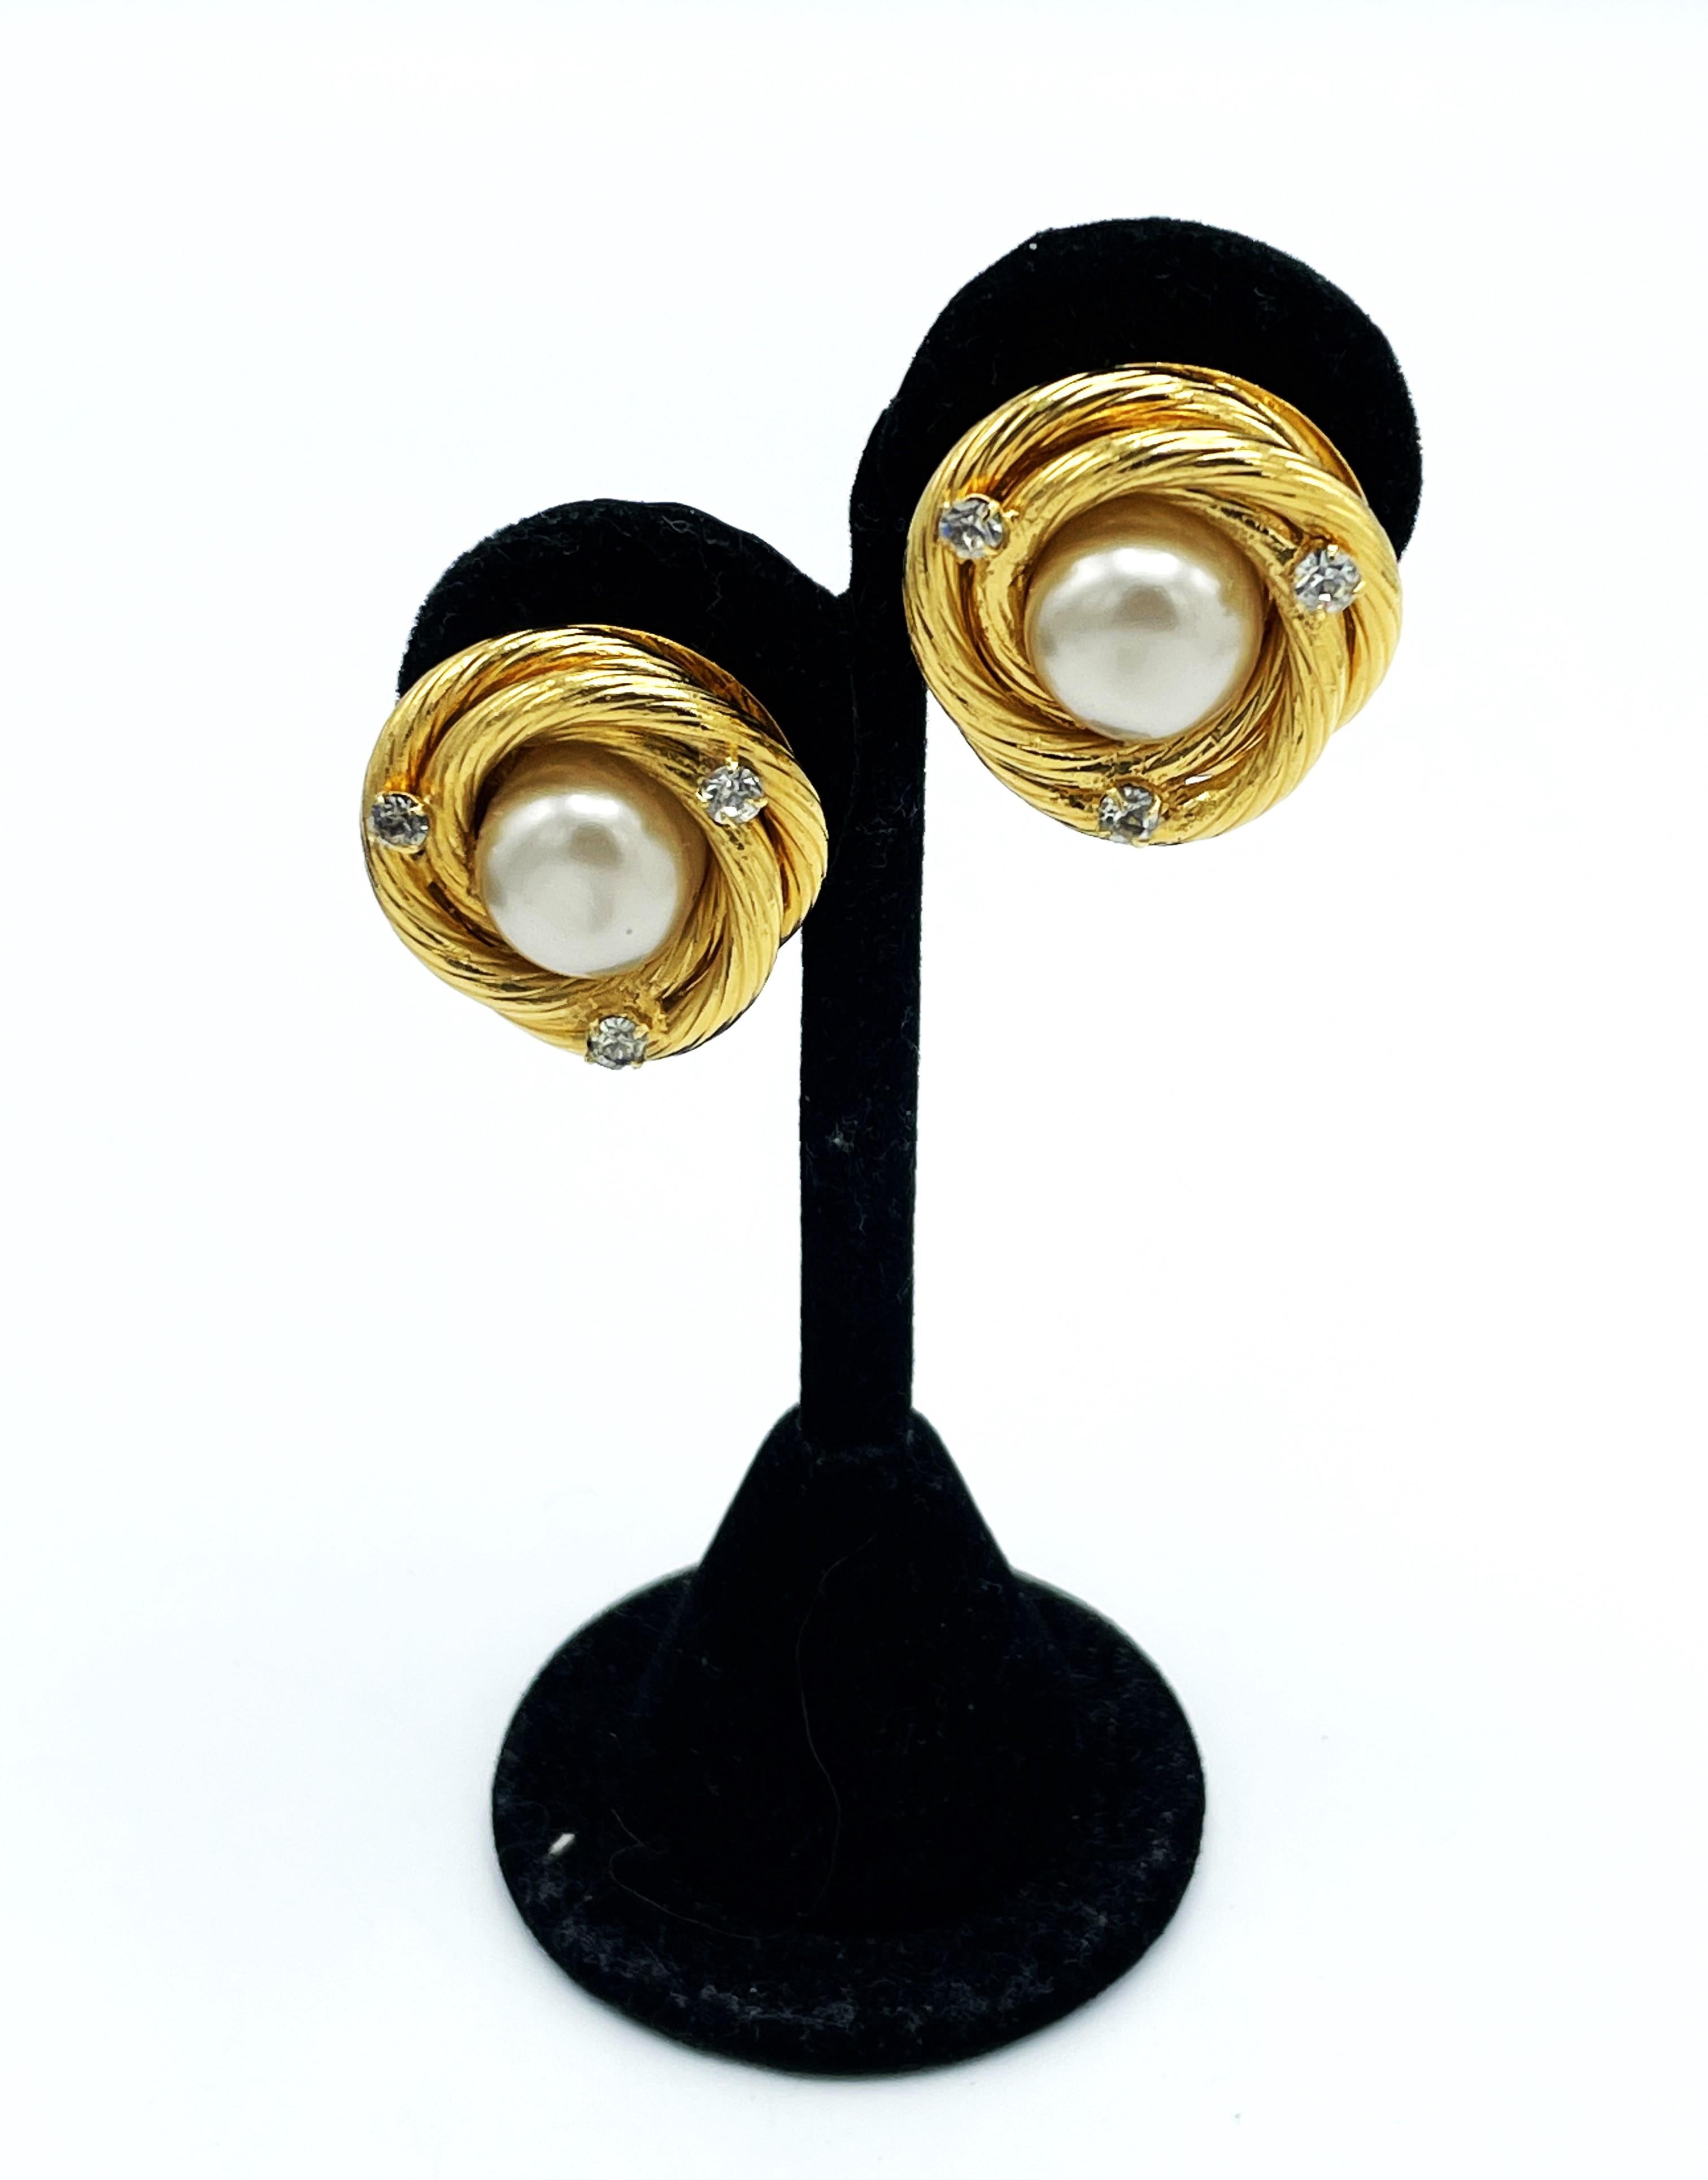 Baguette Cut ICONIC CHANEL Clip-on earring, larg pearl with classic gold cord signed, 1995 P For Sale